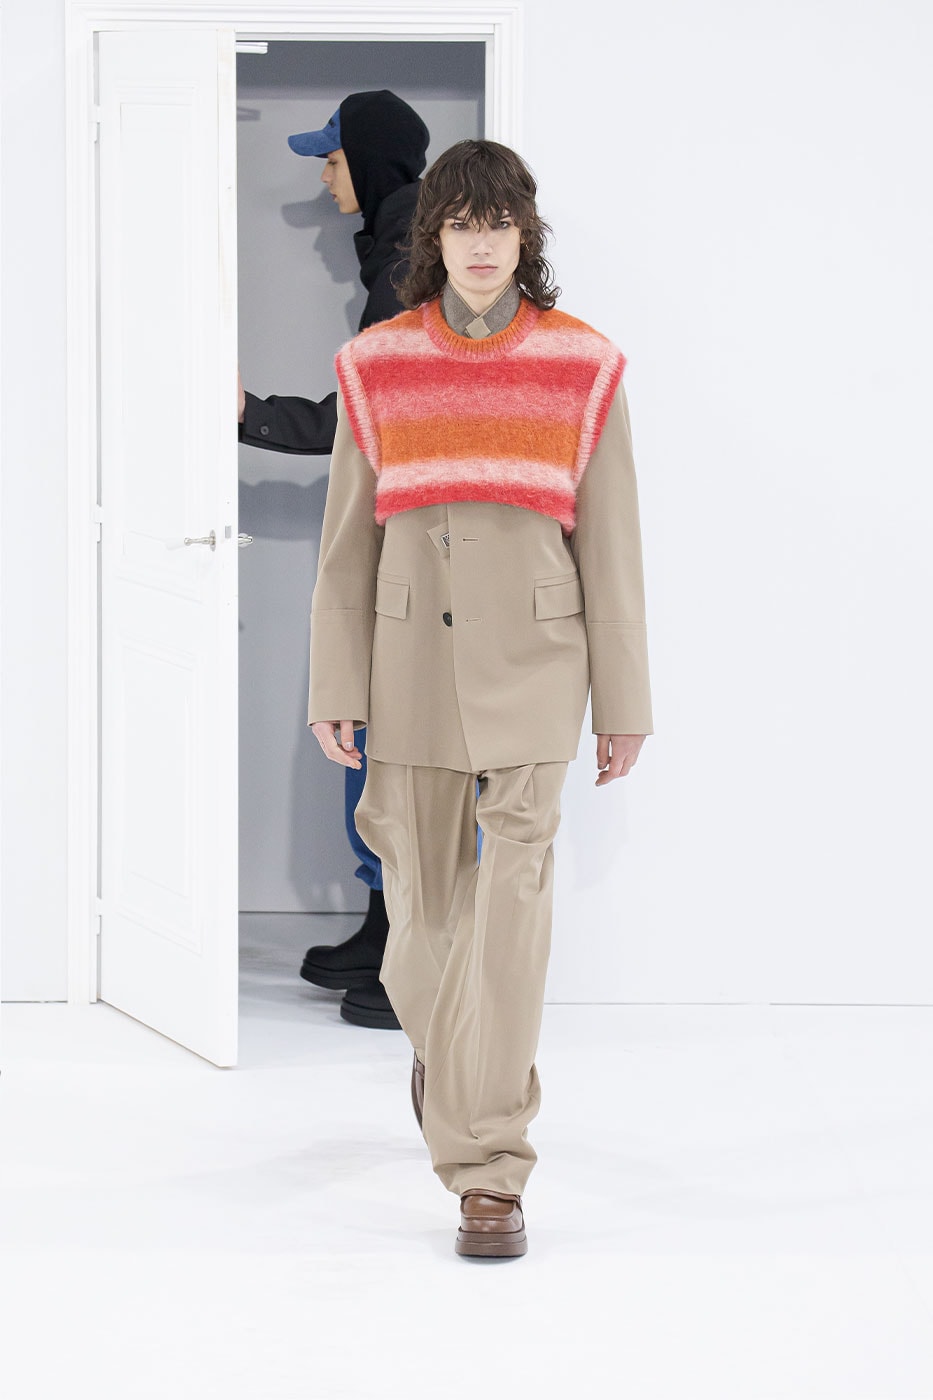 WOOYOUNGMI FW22 Finds the Sweet Spot for Comfortable Layering and Soft Tailoring fall/winter 2022 Paris Fashion Week Runway Collection